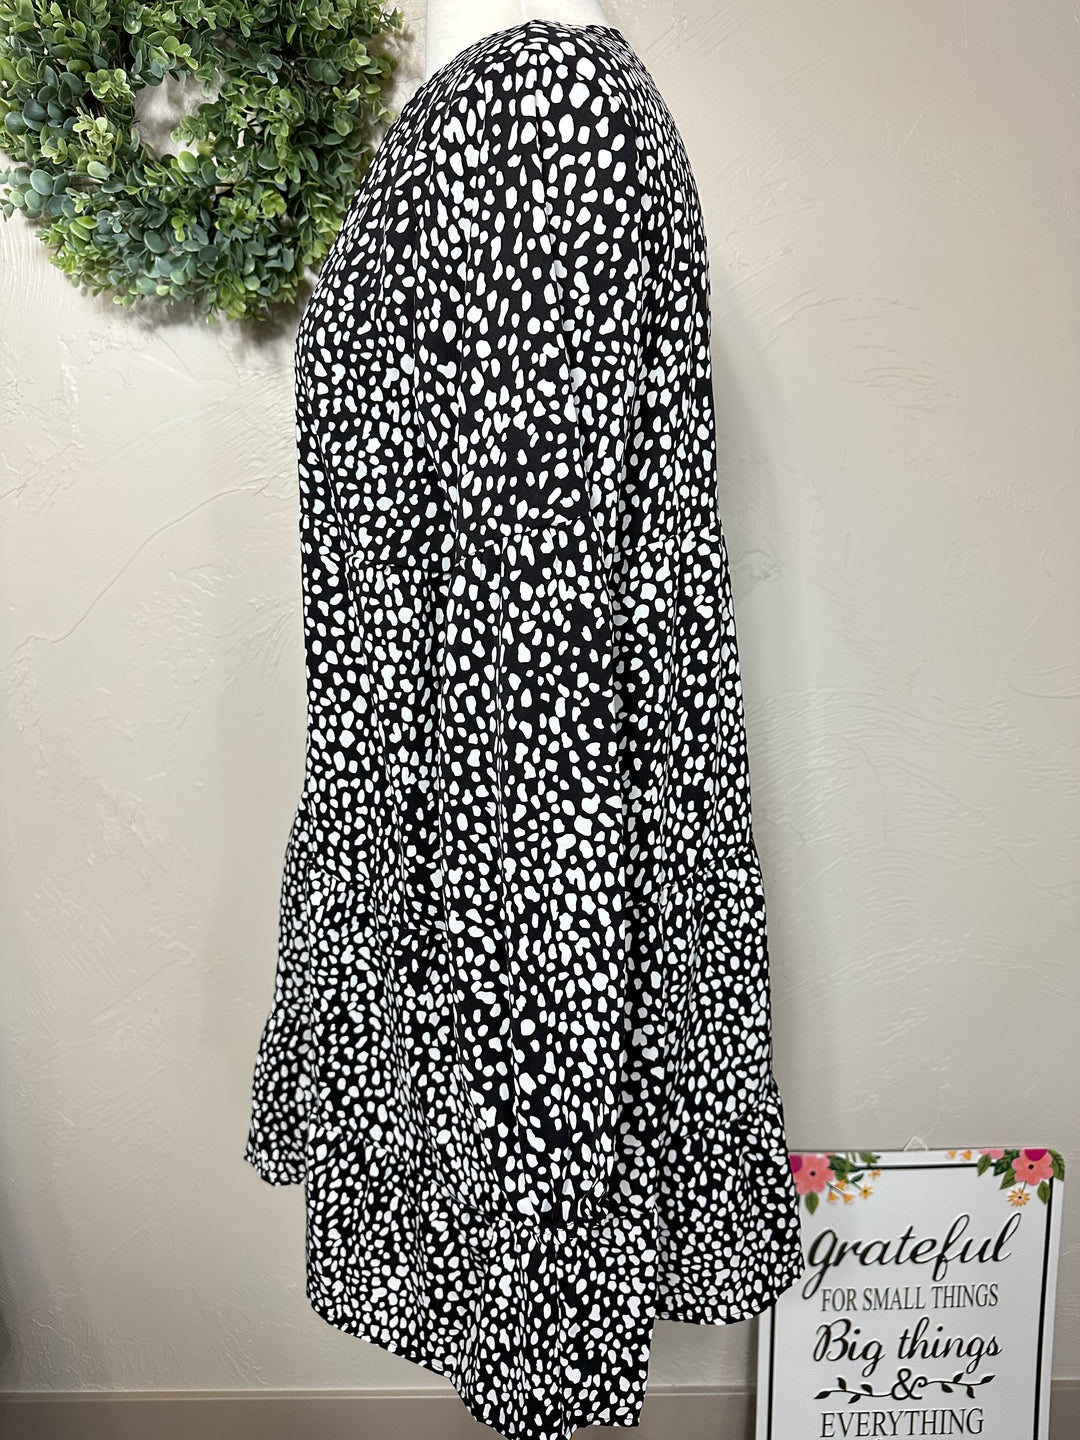 Dressy Modest Tabitha Black with White Spots Tiered Tunic Top